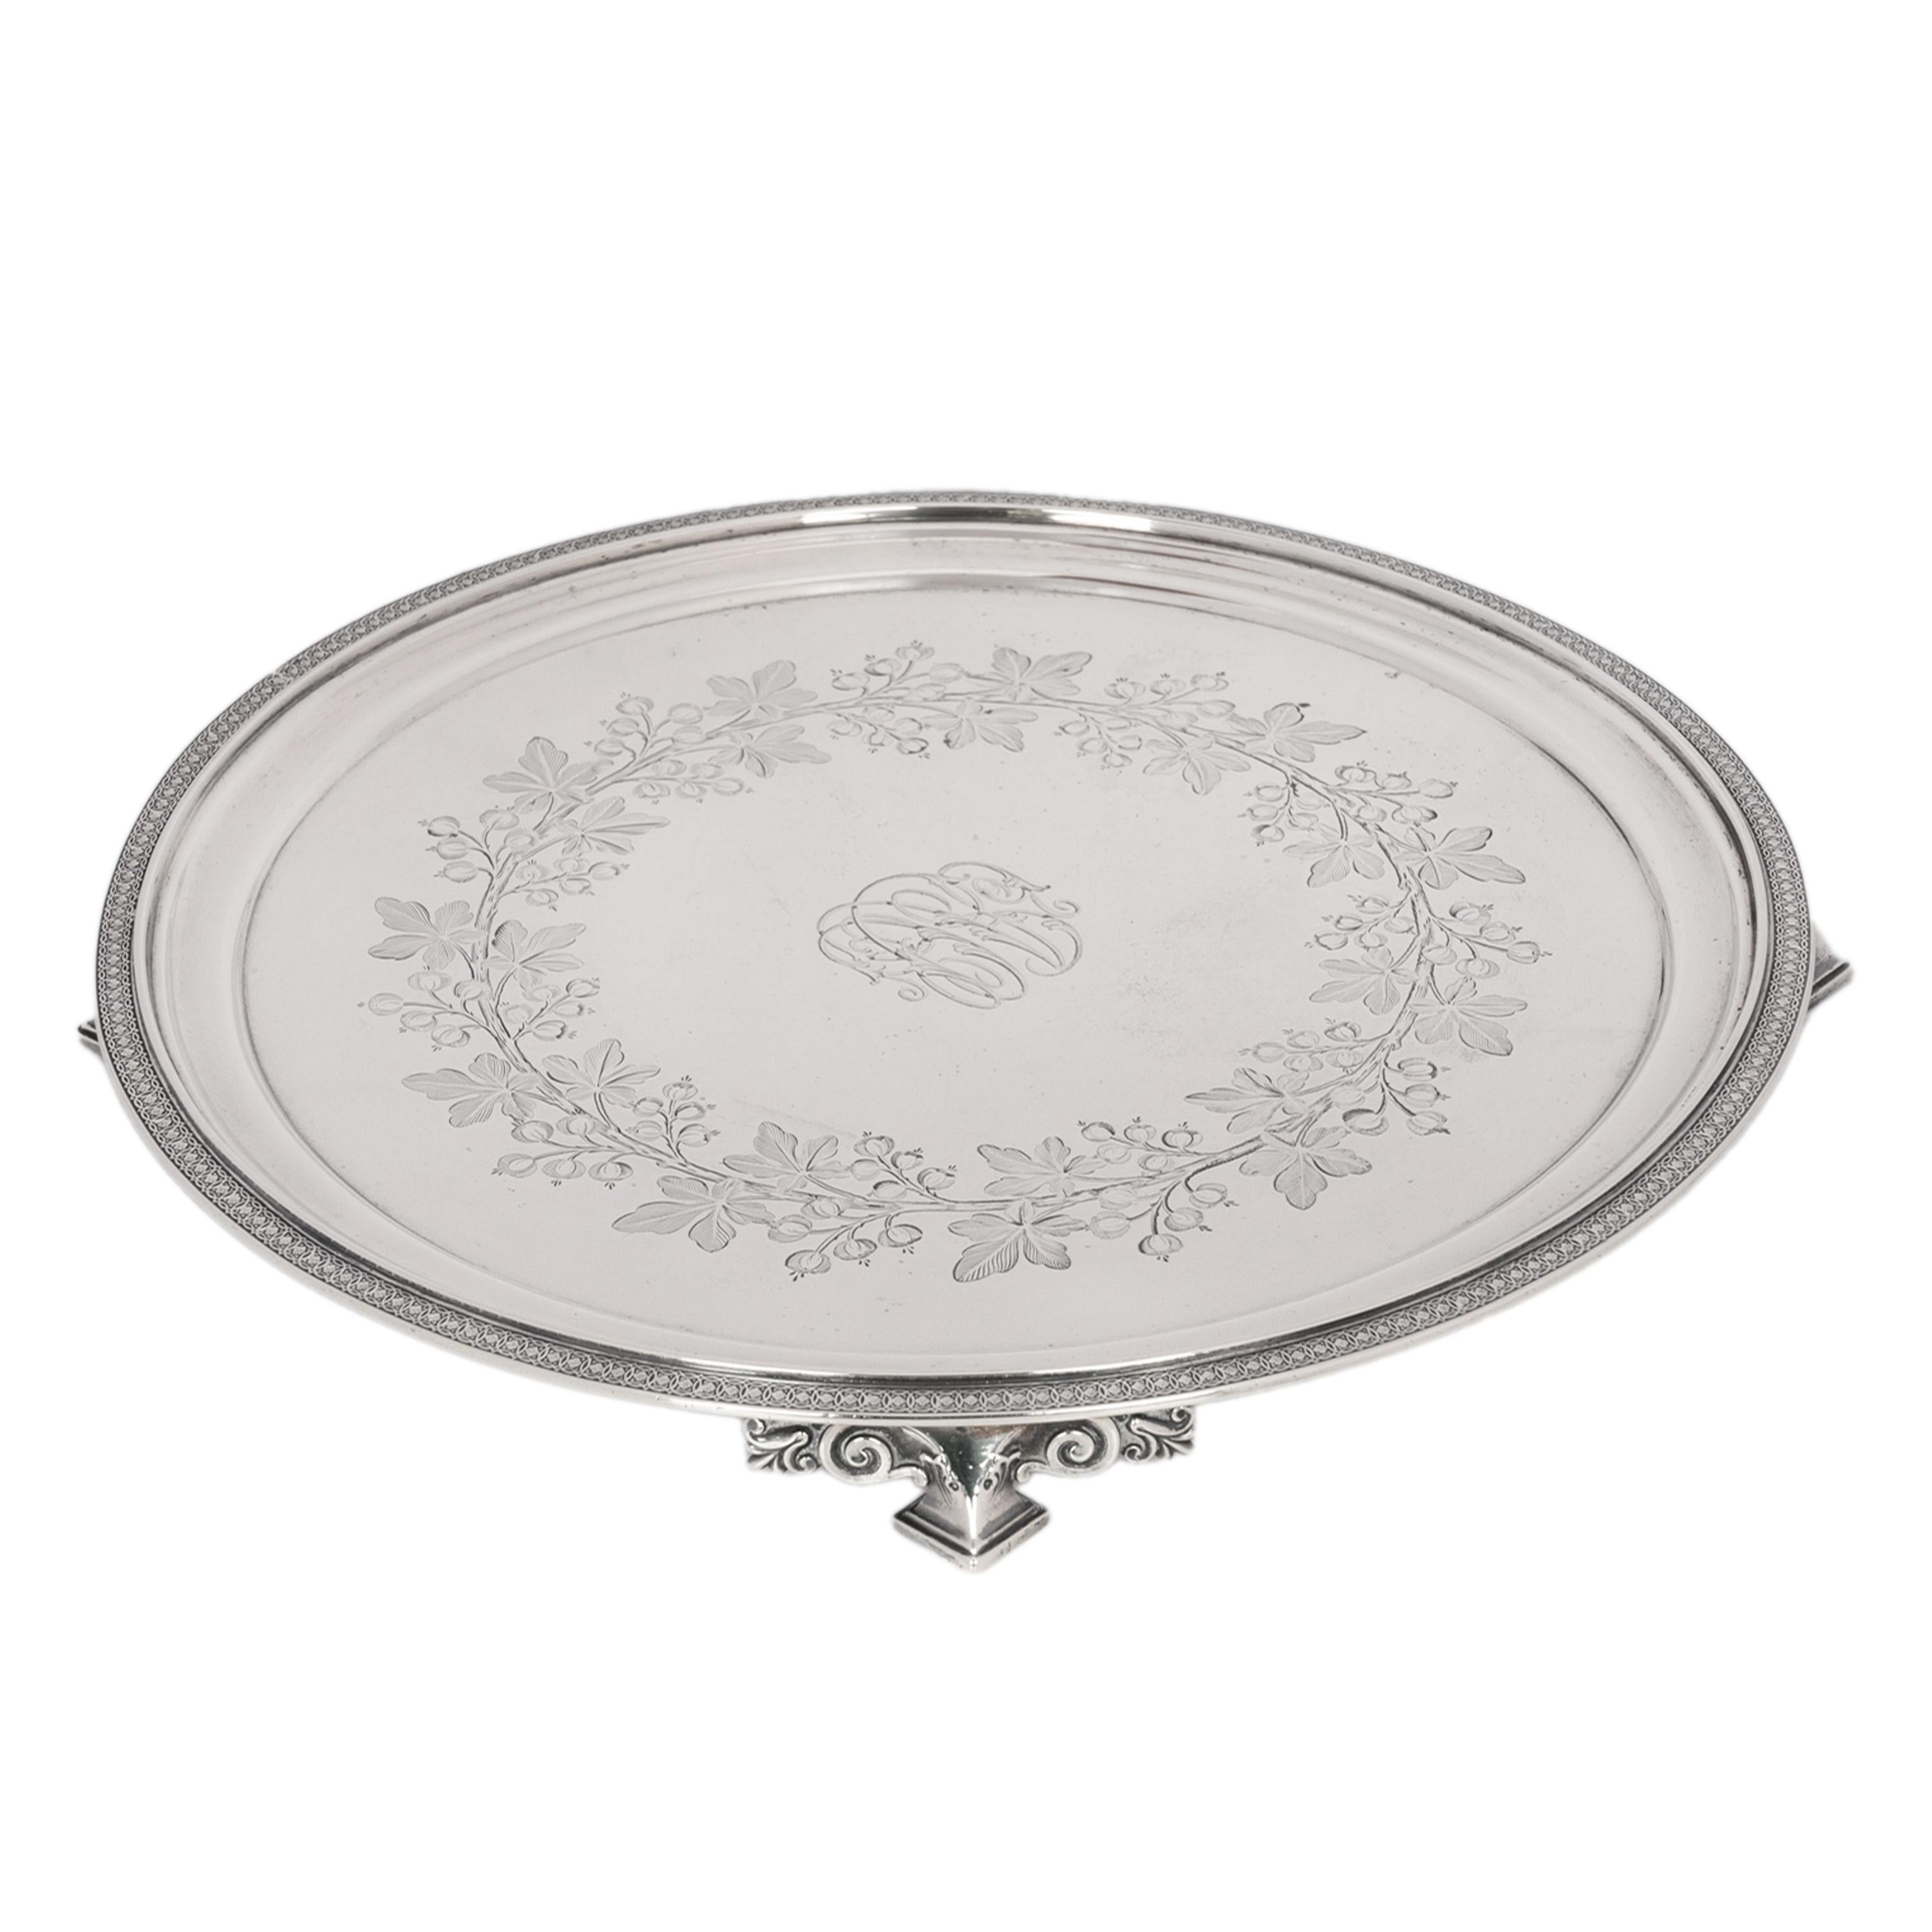 Antique Engraved Sterling Silver Tiffany & Co Footed Salver Tray New York 1870 For Sale 3